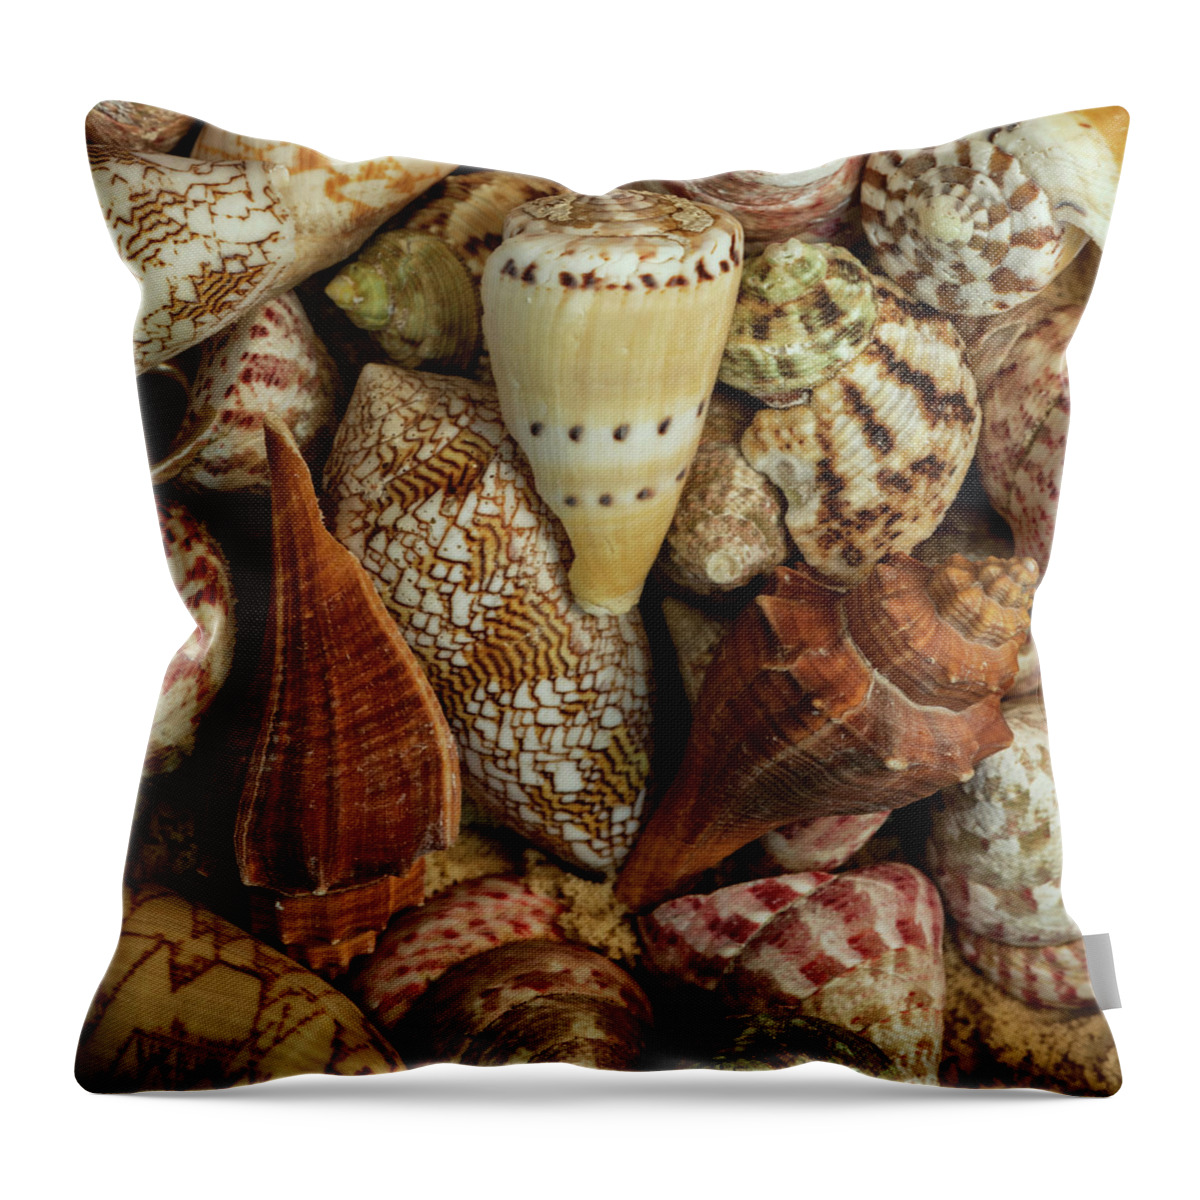 Mini Throw Pillow featuring the mixed media Mini Conch Shells I by Andy Amos